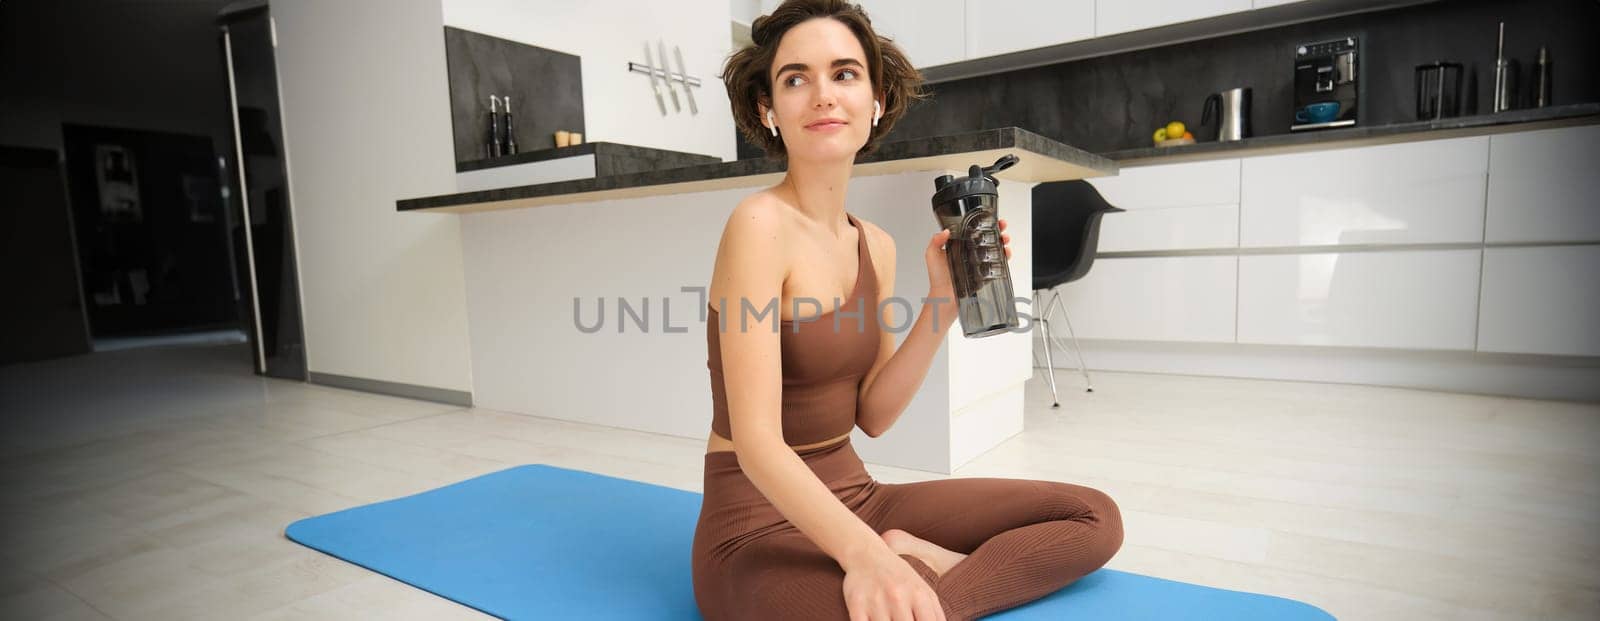 Portrait of fitness woman, young sportswoman at home, drinks water from bottle after workout, training exercises, takes a break after pilates, yoga training, stays hydrated.